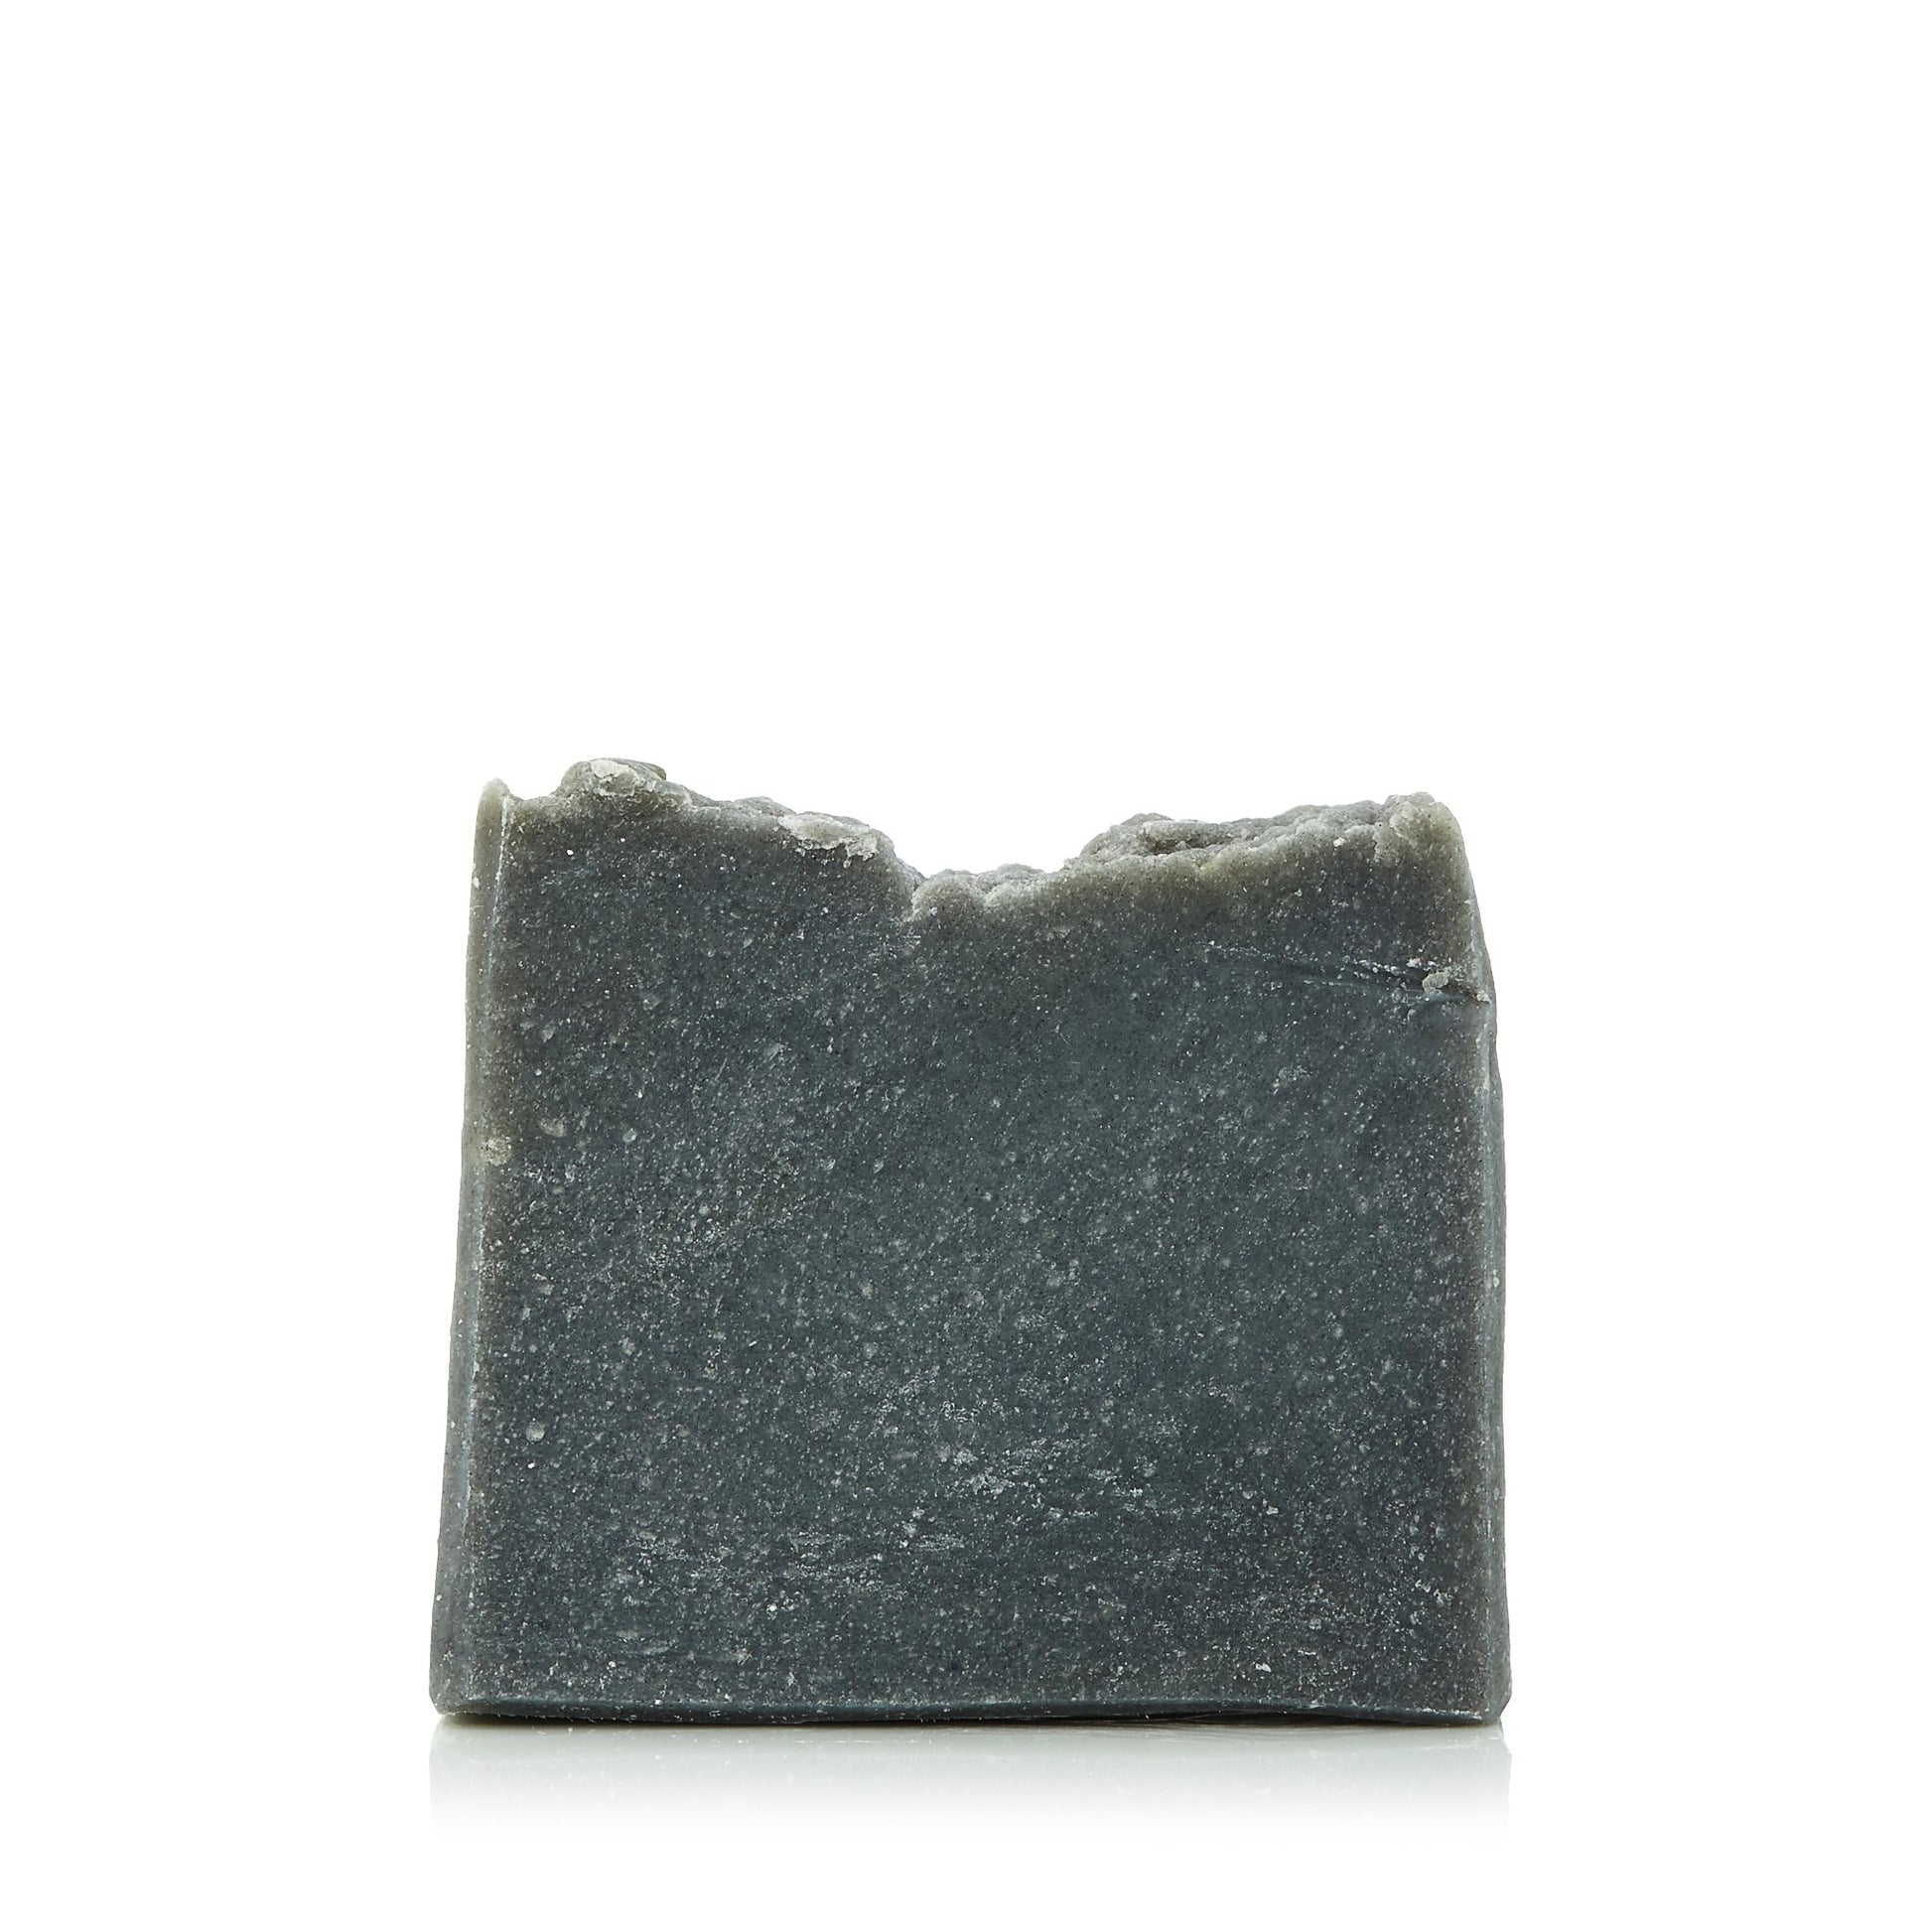 Charcoal Hand Made Soap by The Thx Co. Click to open in modal